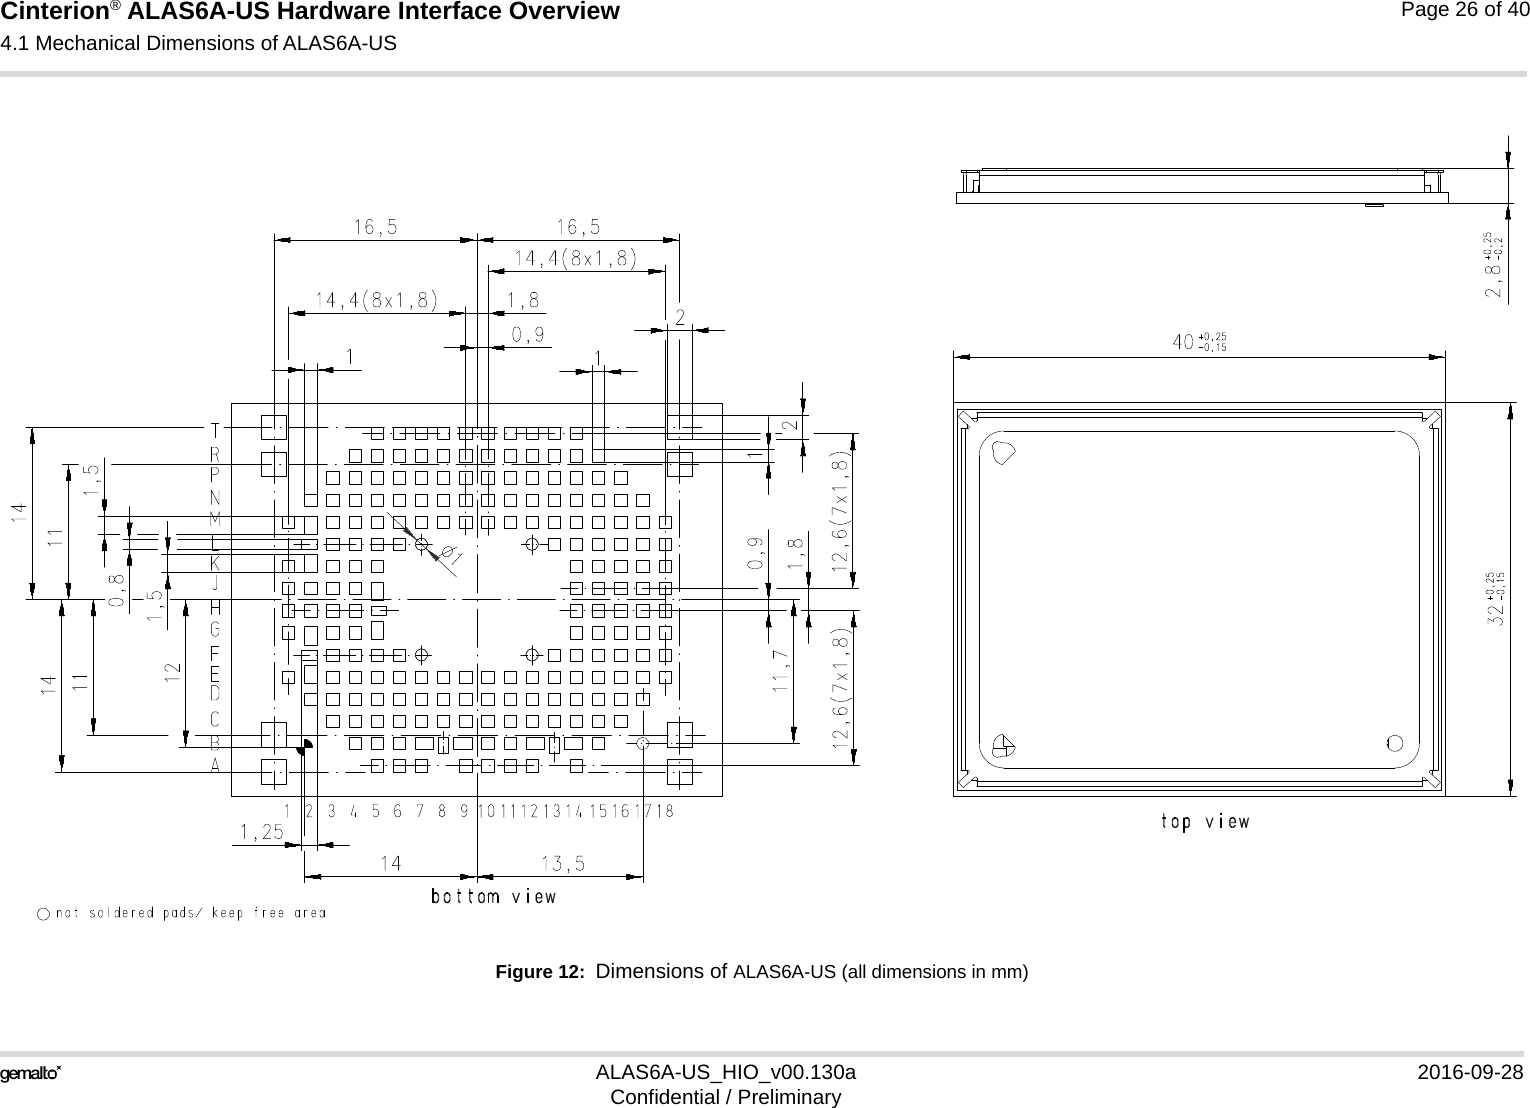 Cinterion® ALAS6A-US Hardware Interface Overview4.1 Mechanical Dimensions of ALAS6A-US26ALAS6A-US_HIO_v00.130a 2016-09-28Confidential / PreliminaryPage 26 of 40Figure 12:  Dimensions of ALAS6A-US (all dimensions in mm)